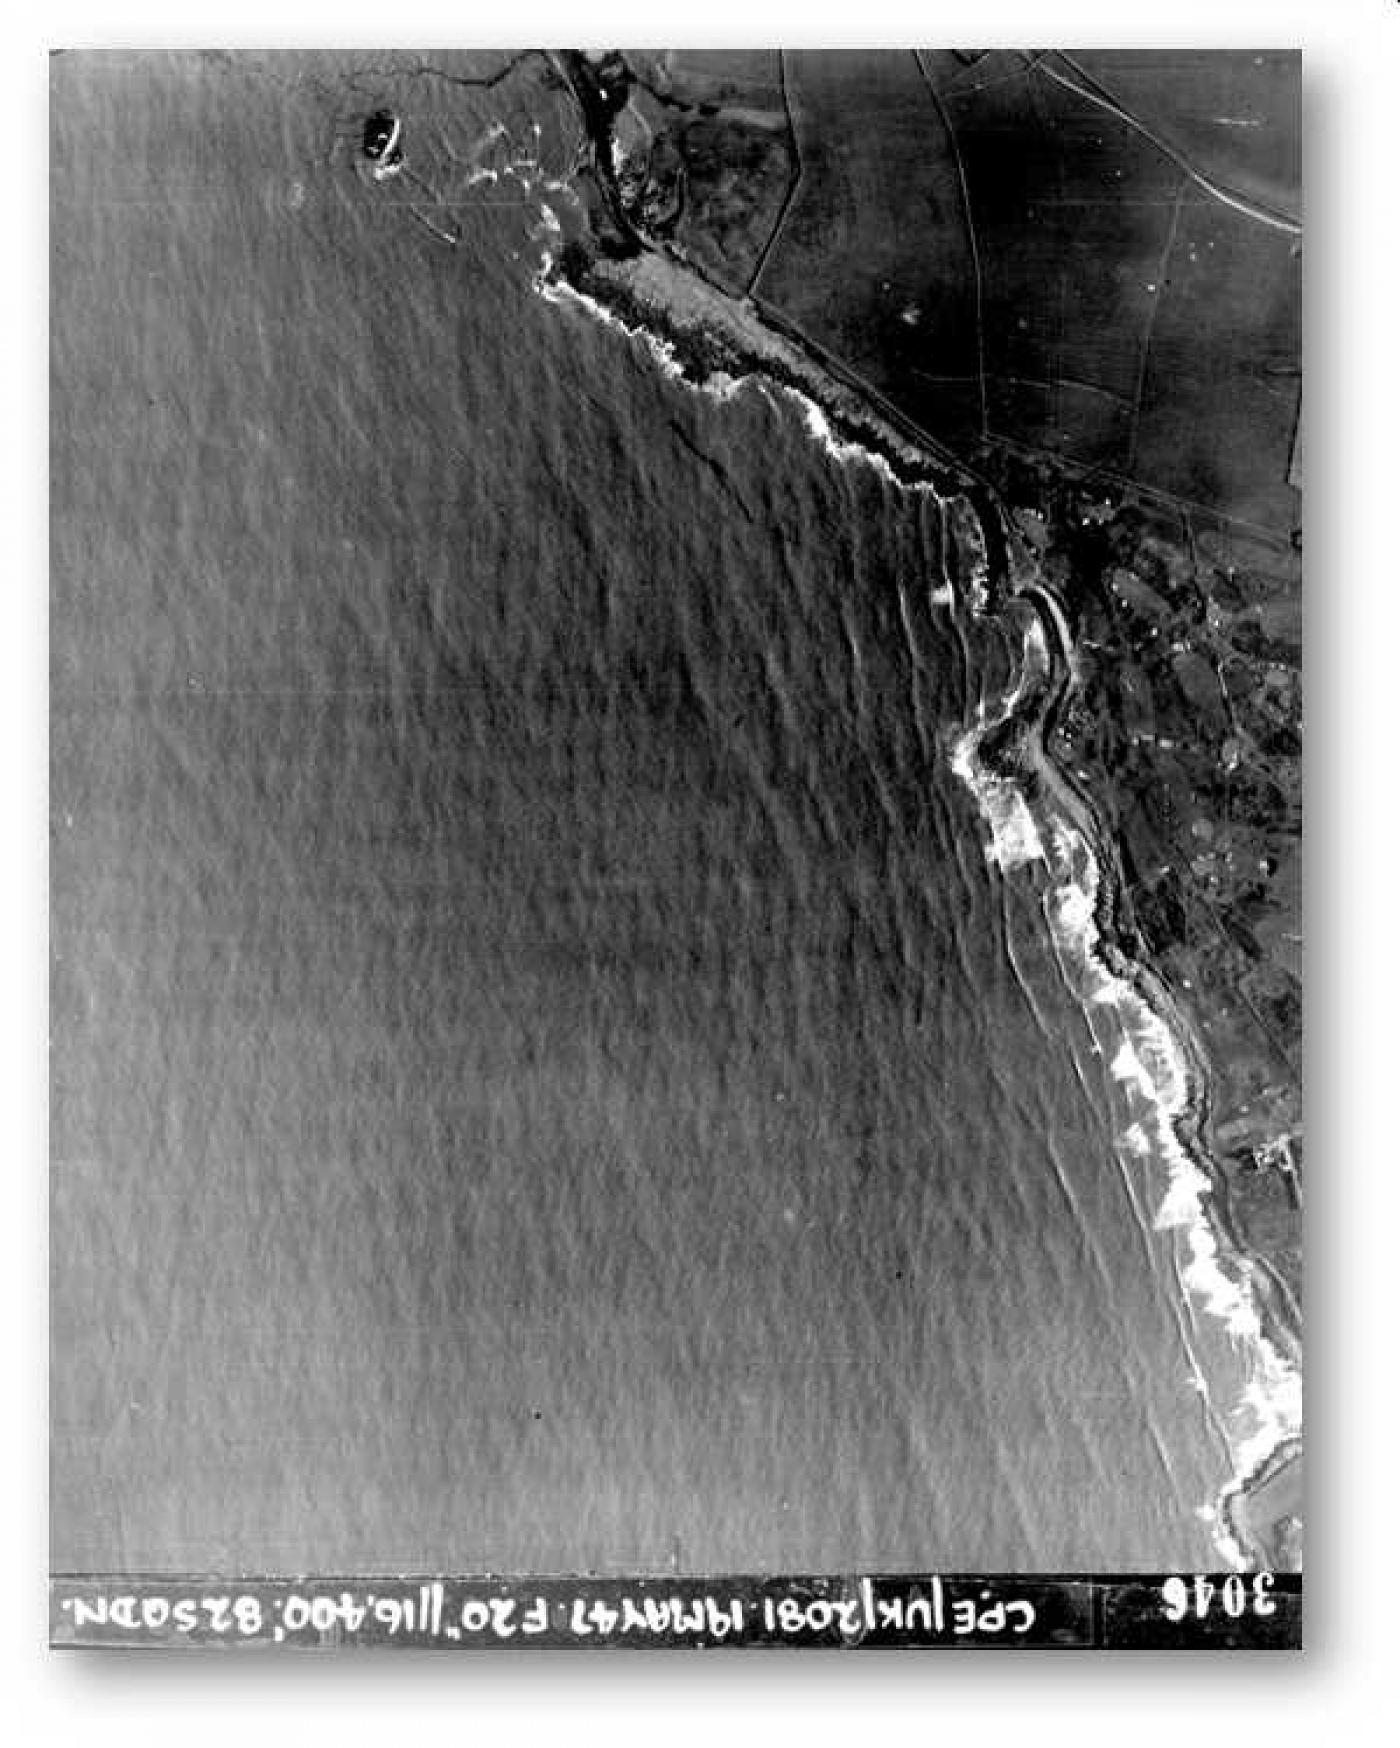 Aerial image No. 3046 taken on 19 May 1947 from the Royal Commission’s Royal Air Force Aerial Photography Collection shows the wreck of the Samtampa near the bottom right of the photograph.